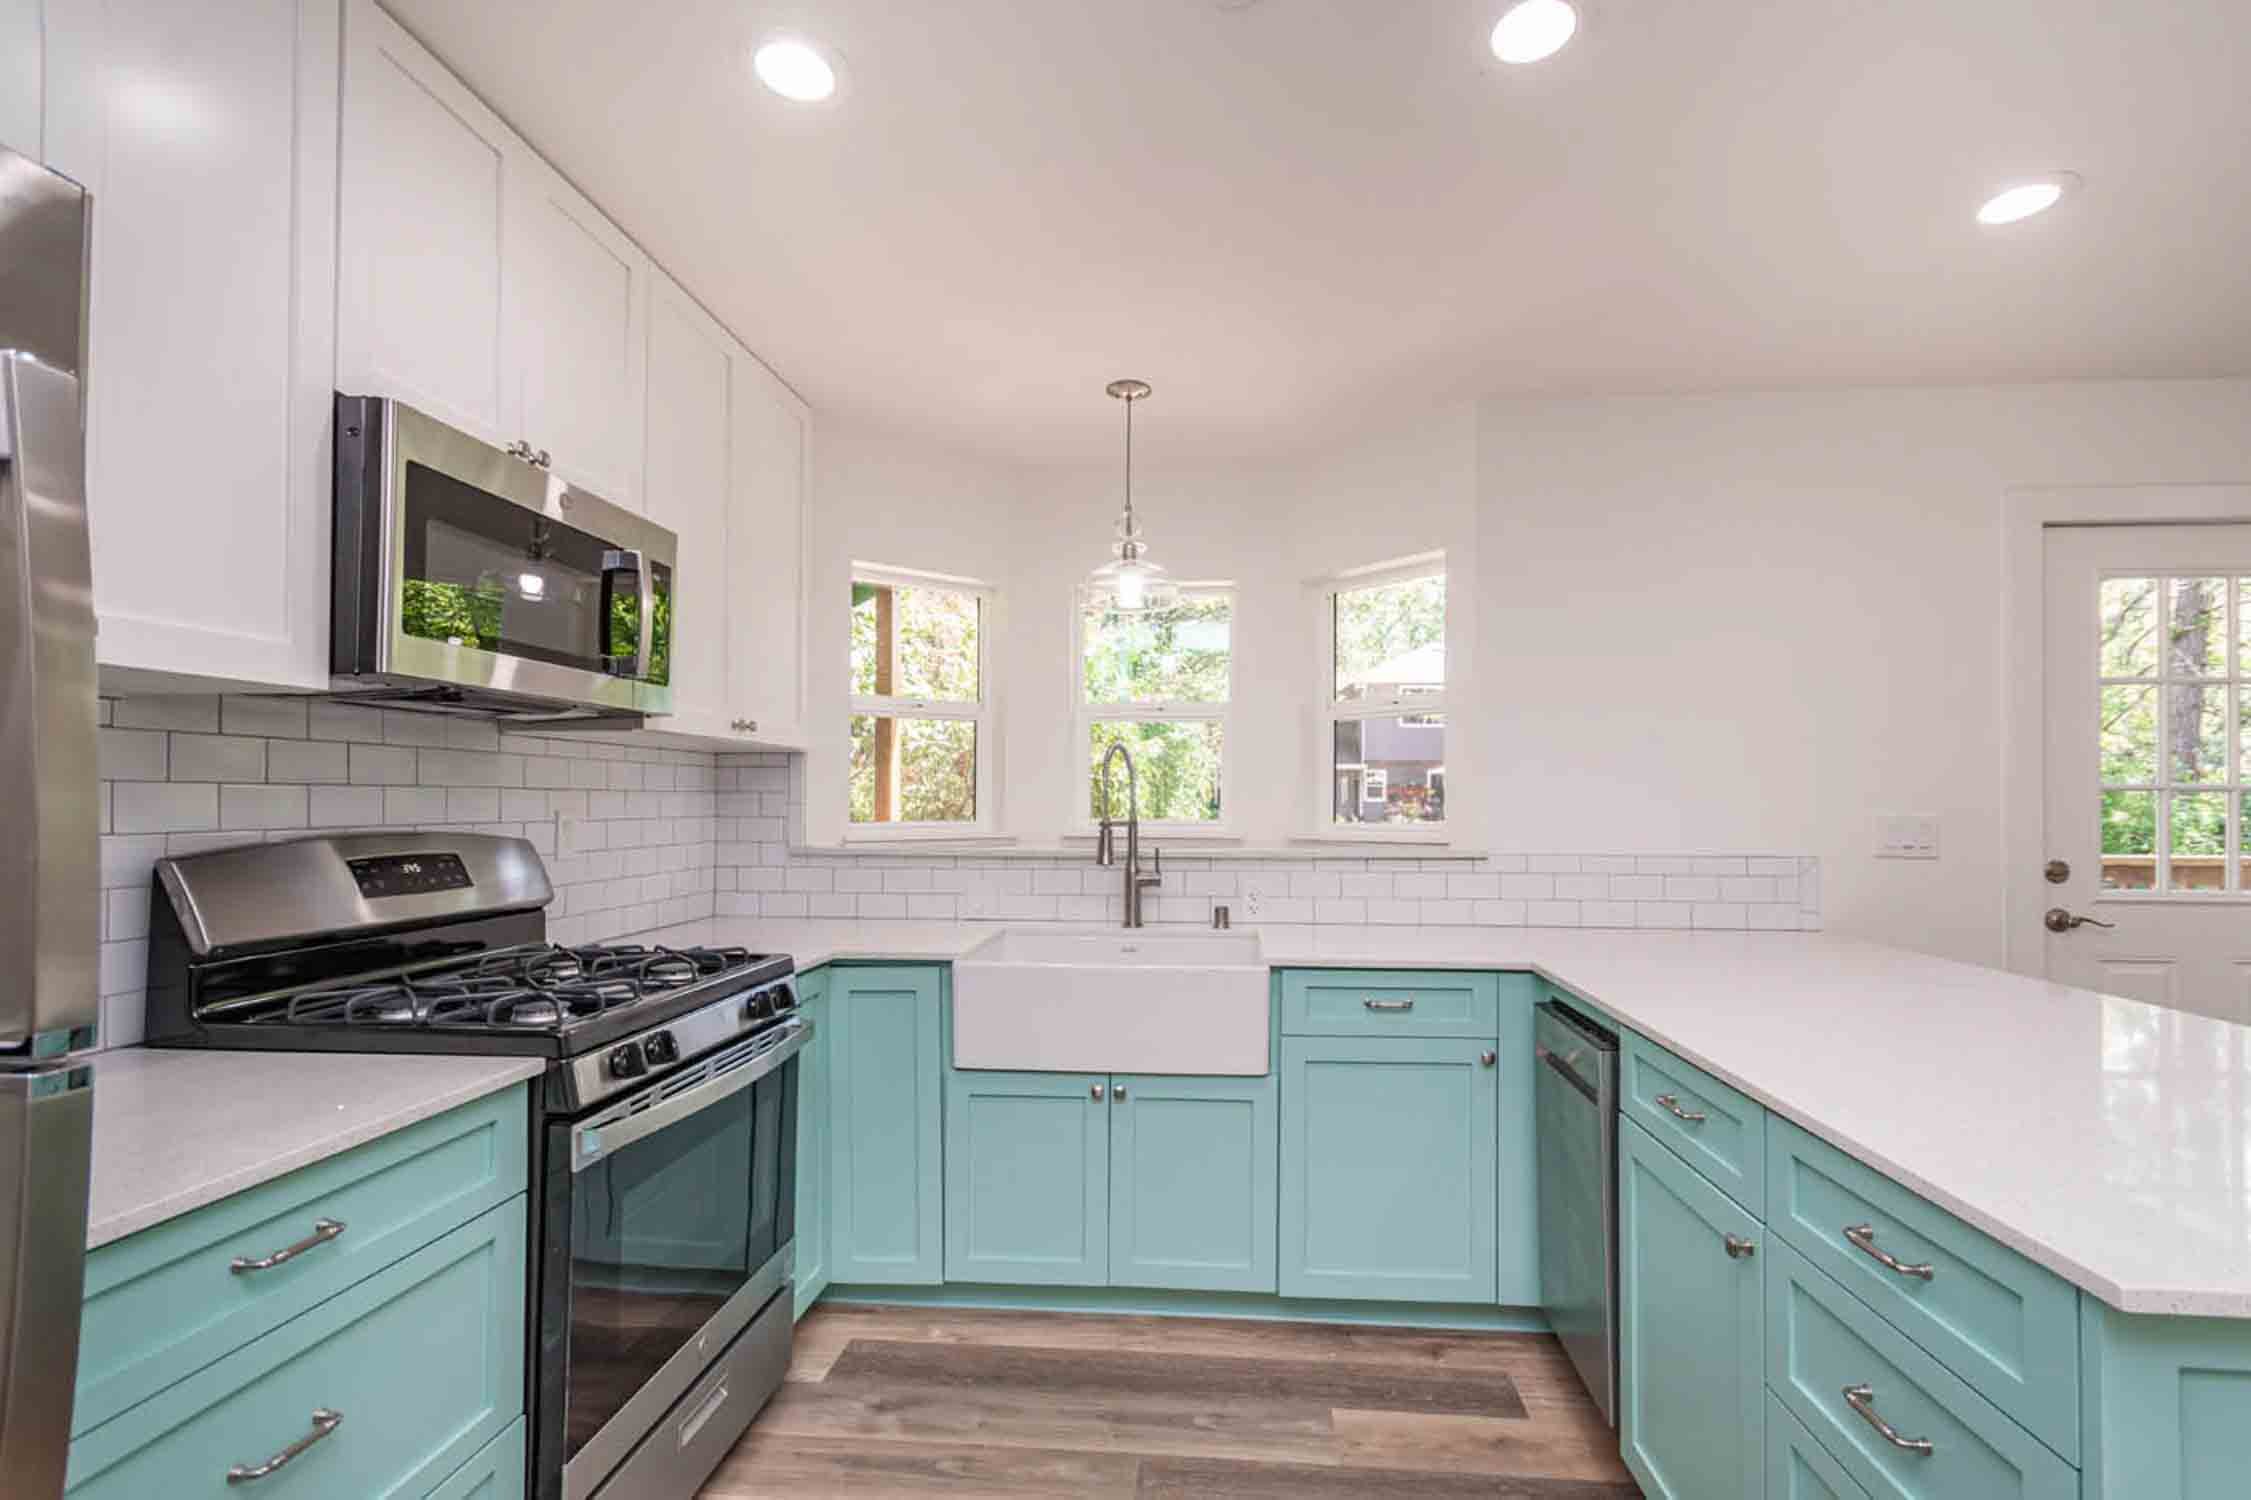 Richmond tiny house companies and their project of a mint green kitchen in a home.